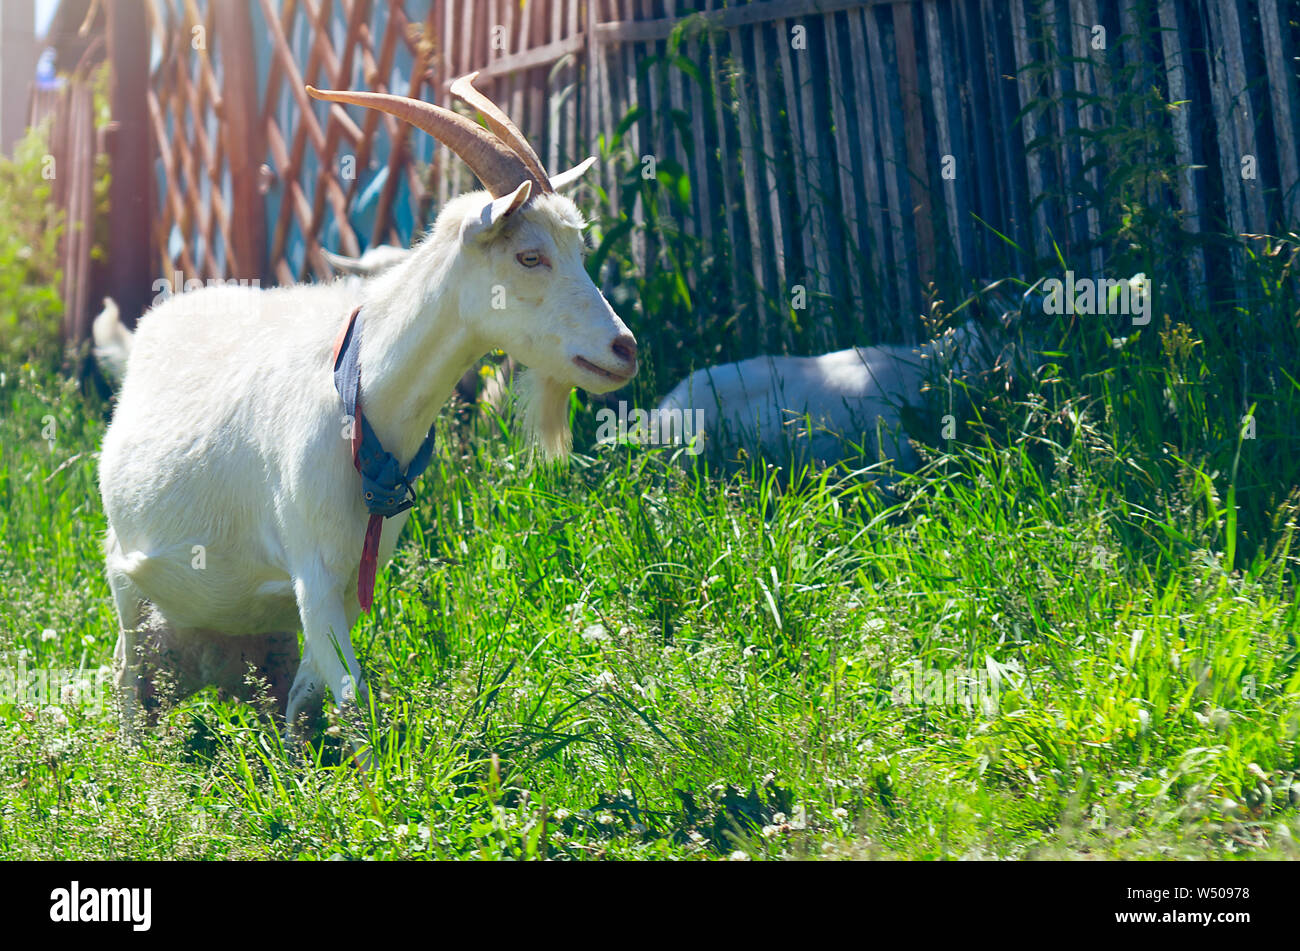 The Domestic White Nanny Goat or Doe (Capra Aegagrus Hircus) with Handmade Collar Walking Along the Fence in Rural Area While a Goat Kid Hiding in the Stock Photo